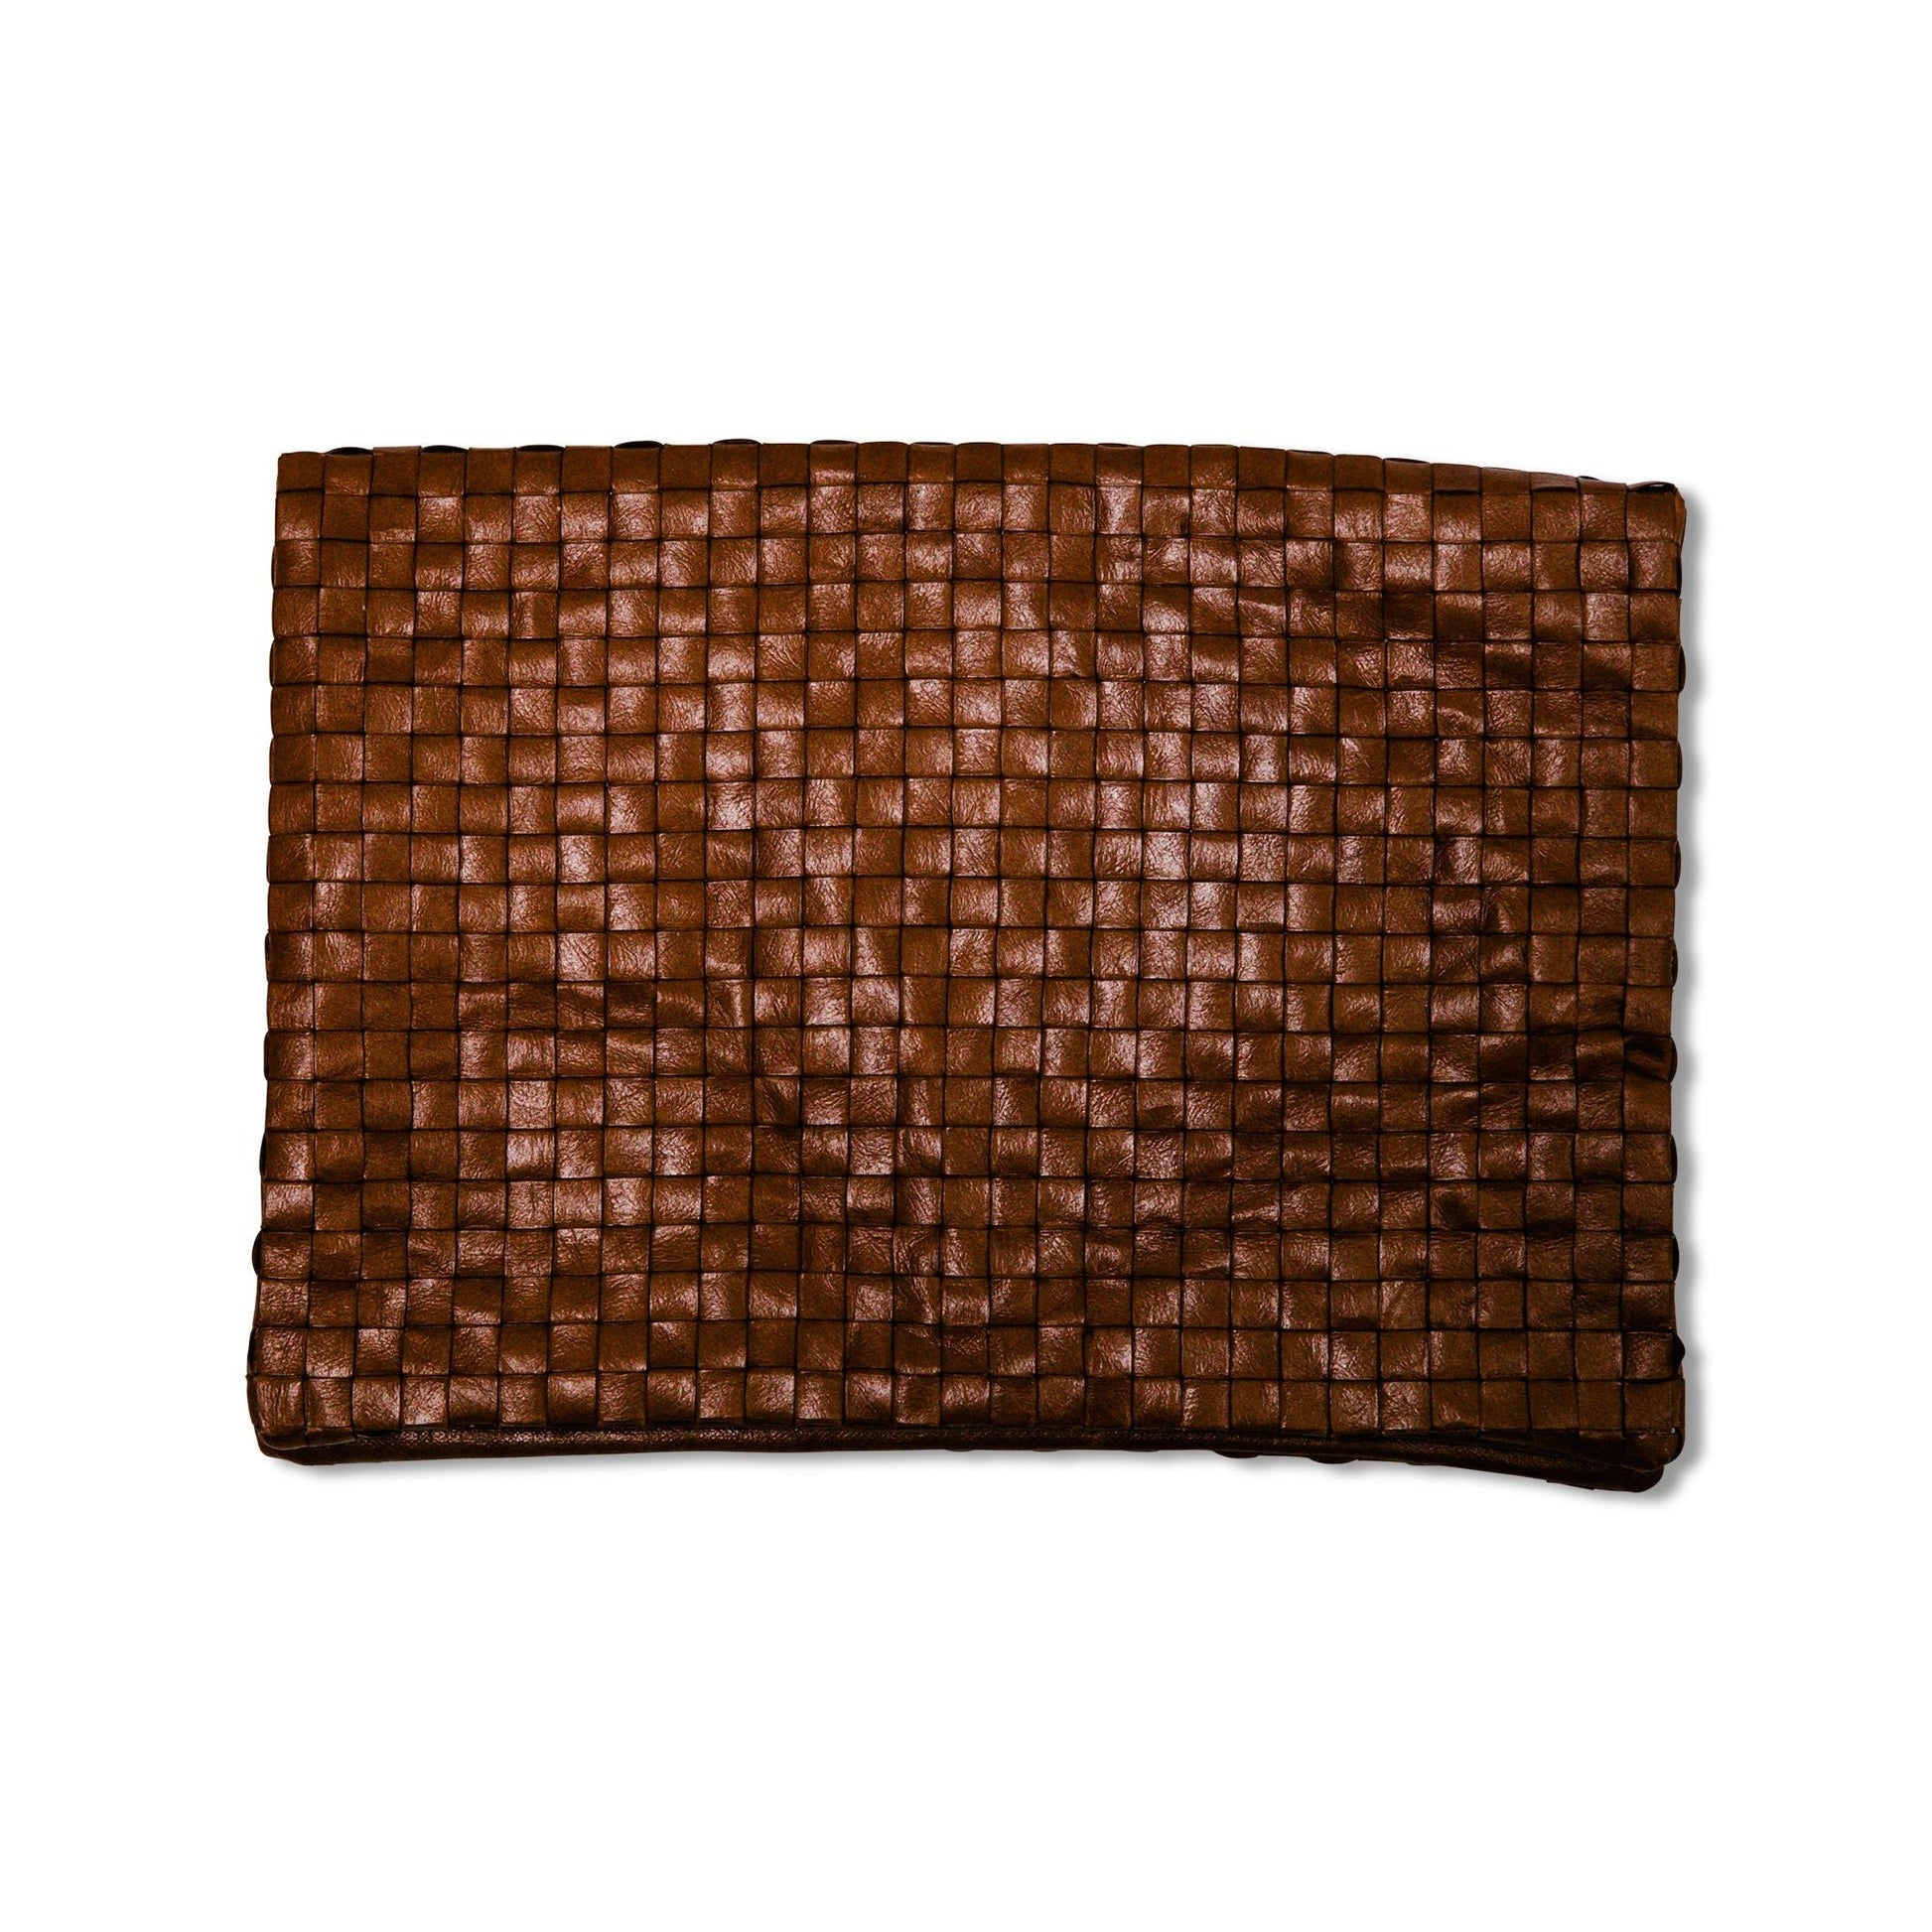 A woven washable paper clutchbag is shown from the front in chocolate brown.